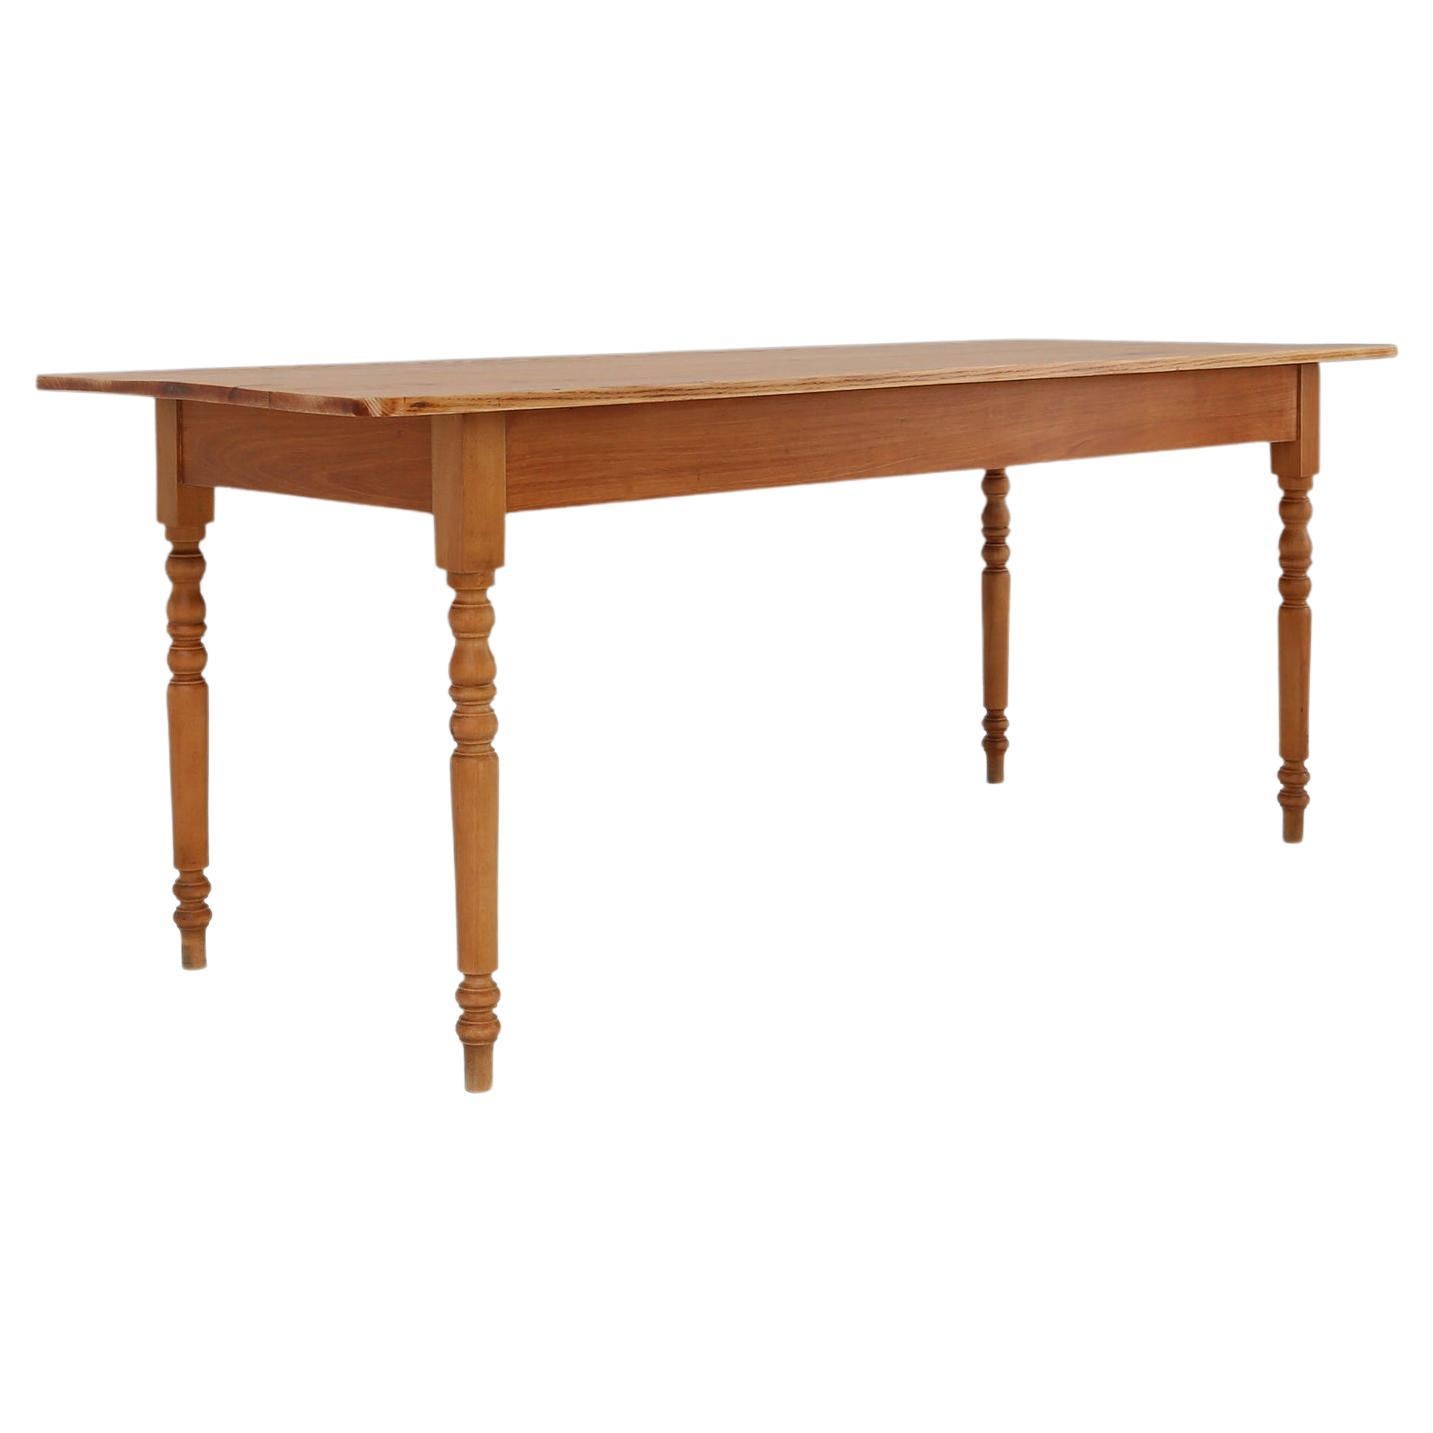 Rustic French farm table in wood with turned legs, ca. 1850 For Sale